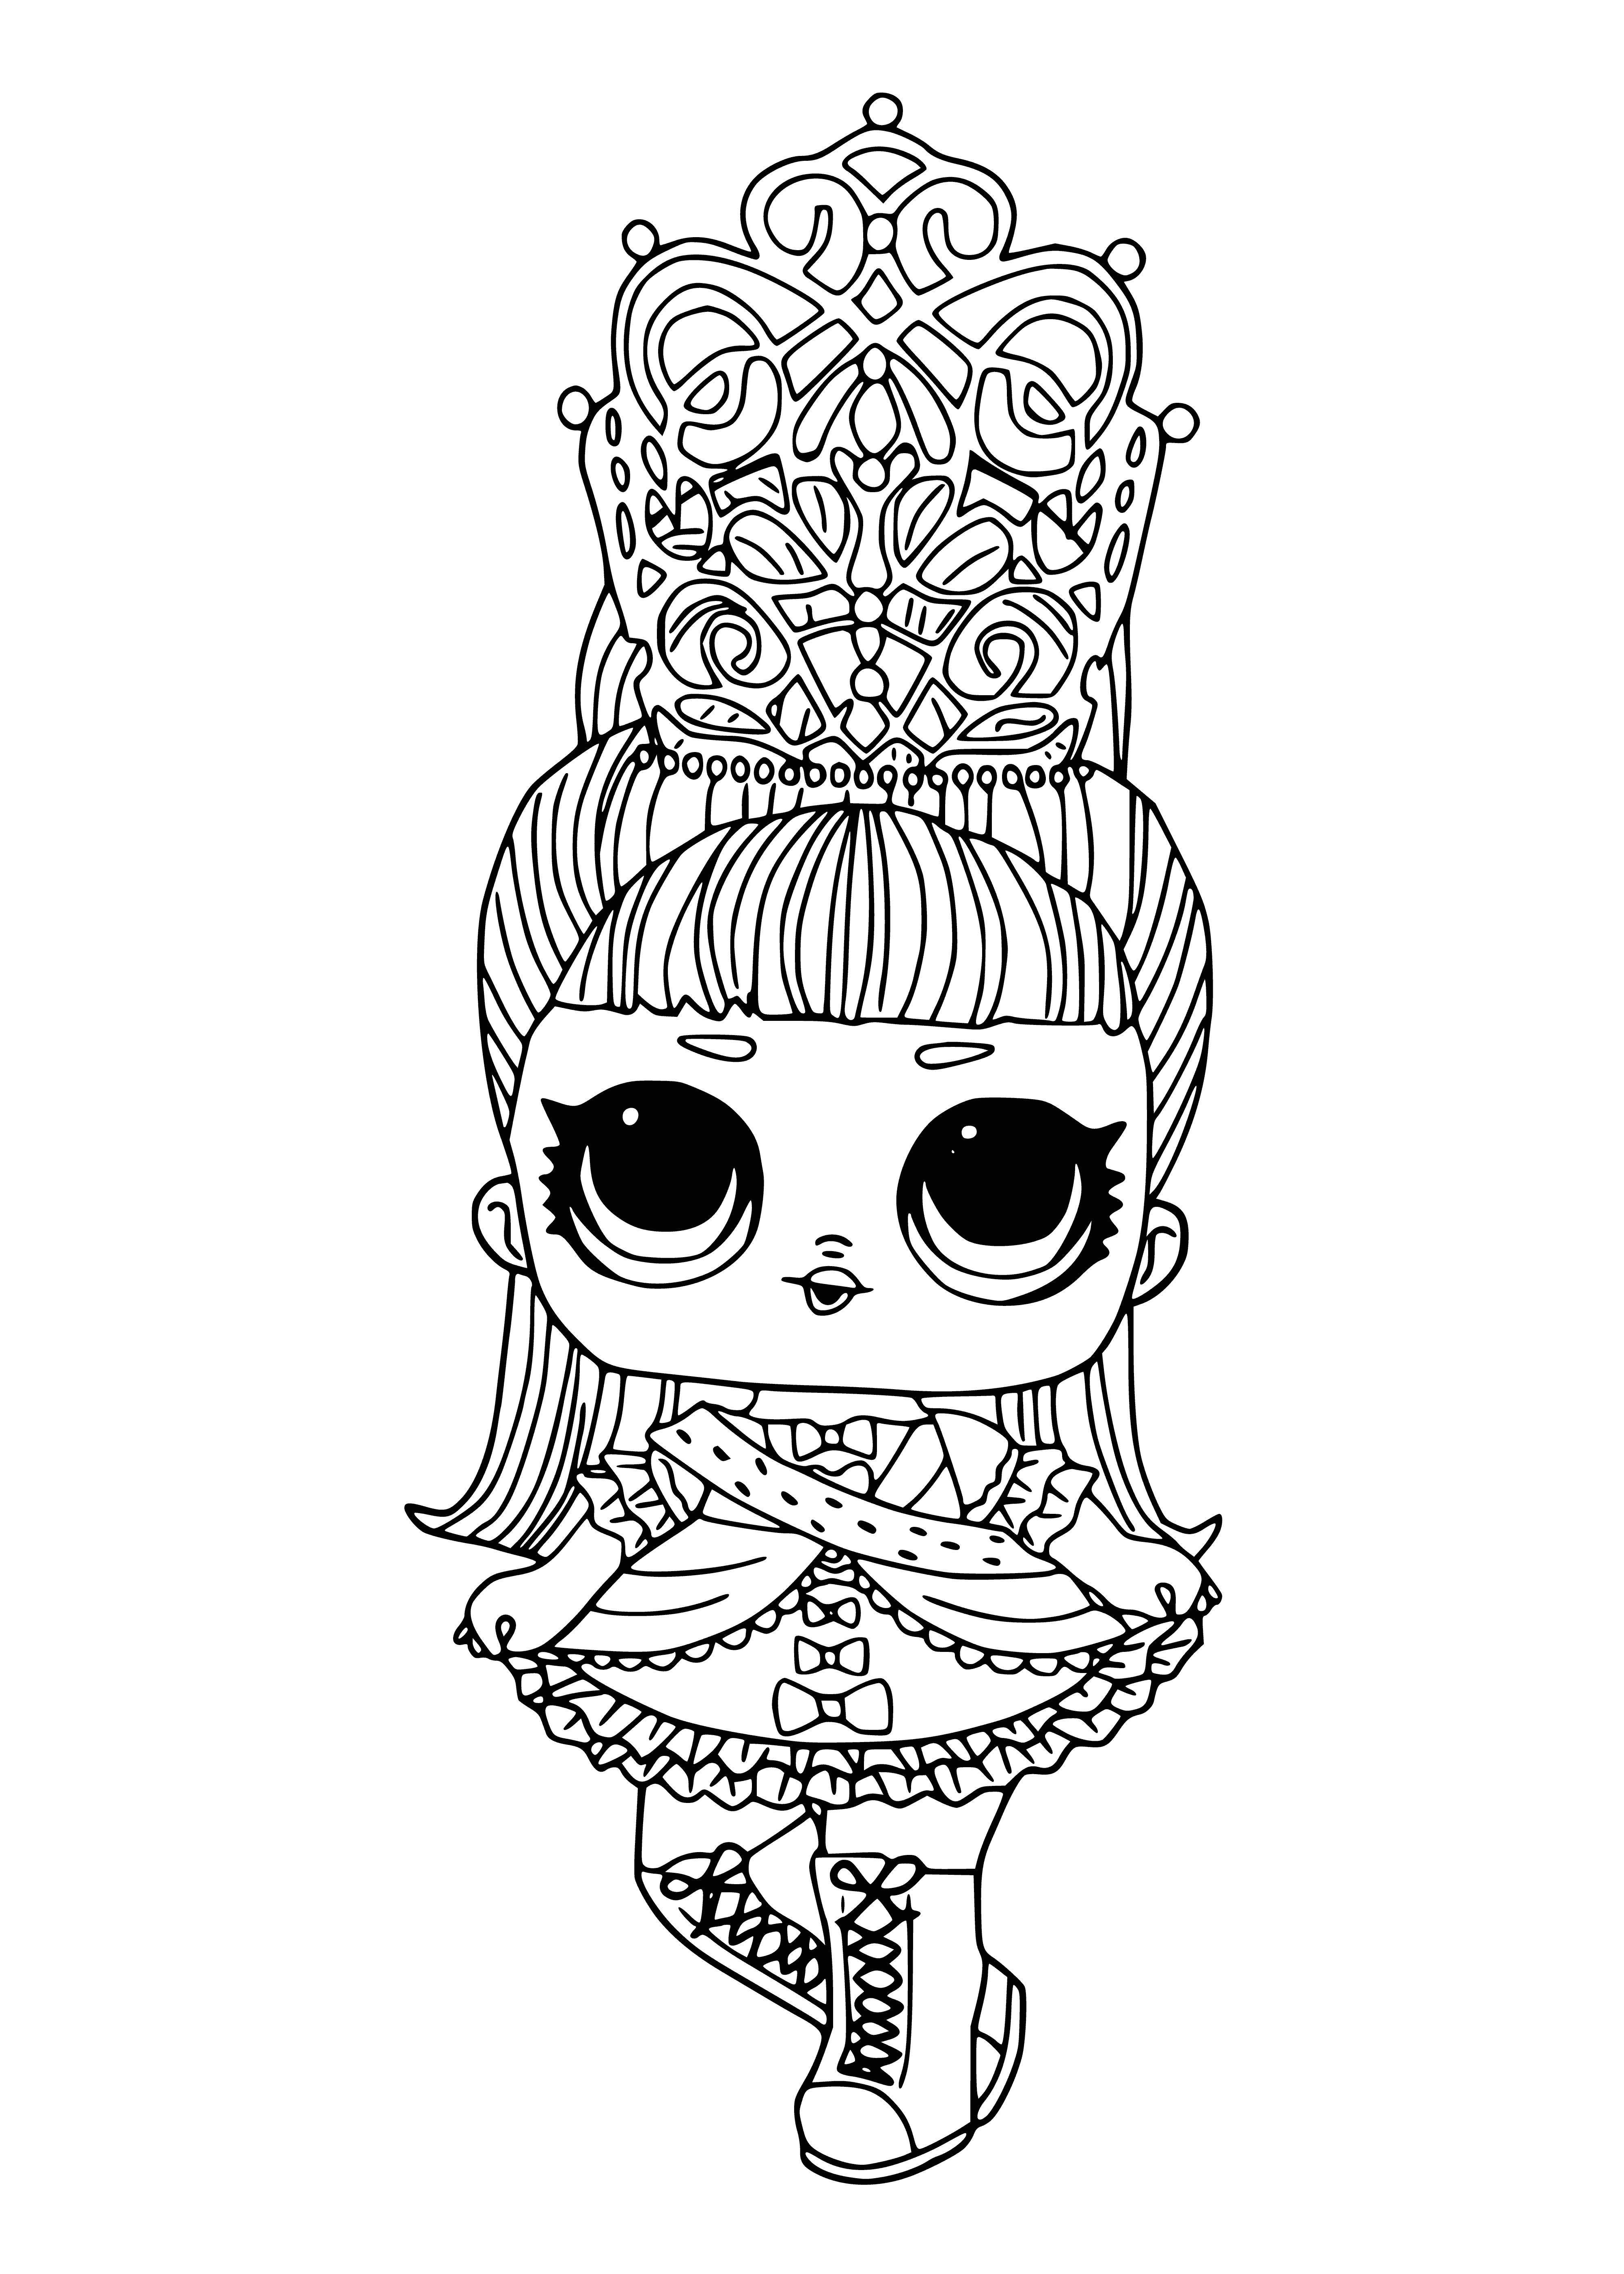 coloring page: Young woman stands proudly in pink & gold dress, gold crown, holding a pink purse, smiling w/ eyes closed. Ready to take on the world!